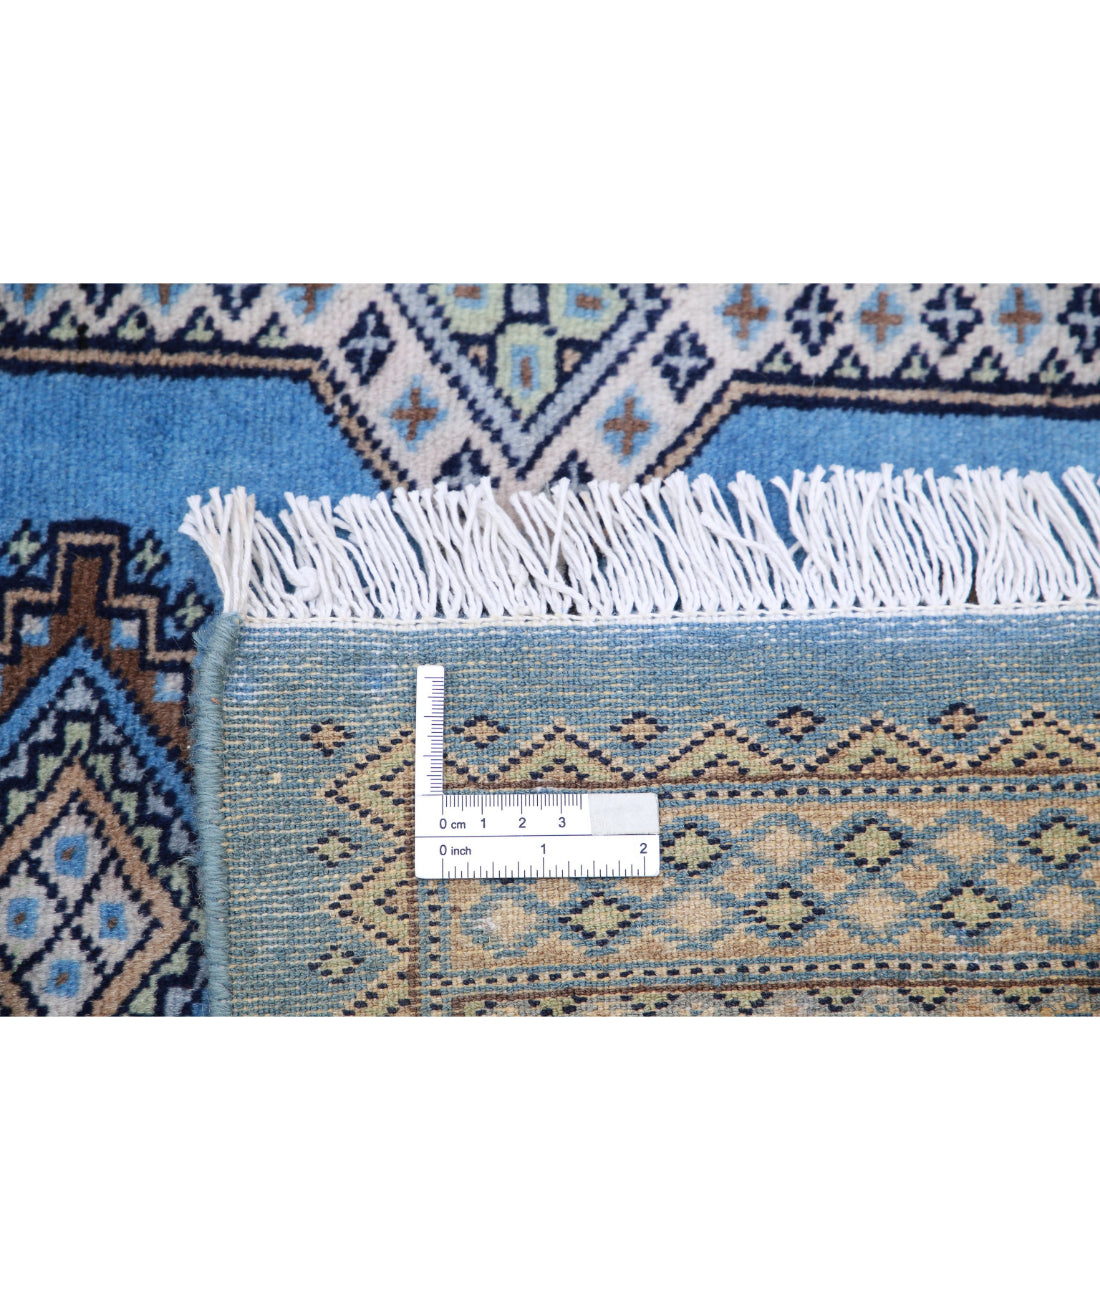 Hand Knotted Tribal Bokhara Wool Rug - 6'7'' x 6'5'' 6'7'' x 6'5'' (198 X 193) / Blue / Ivory